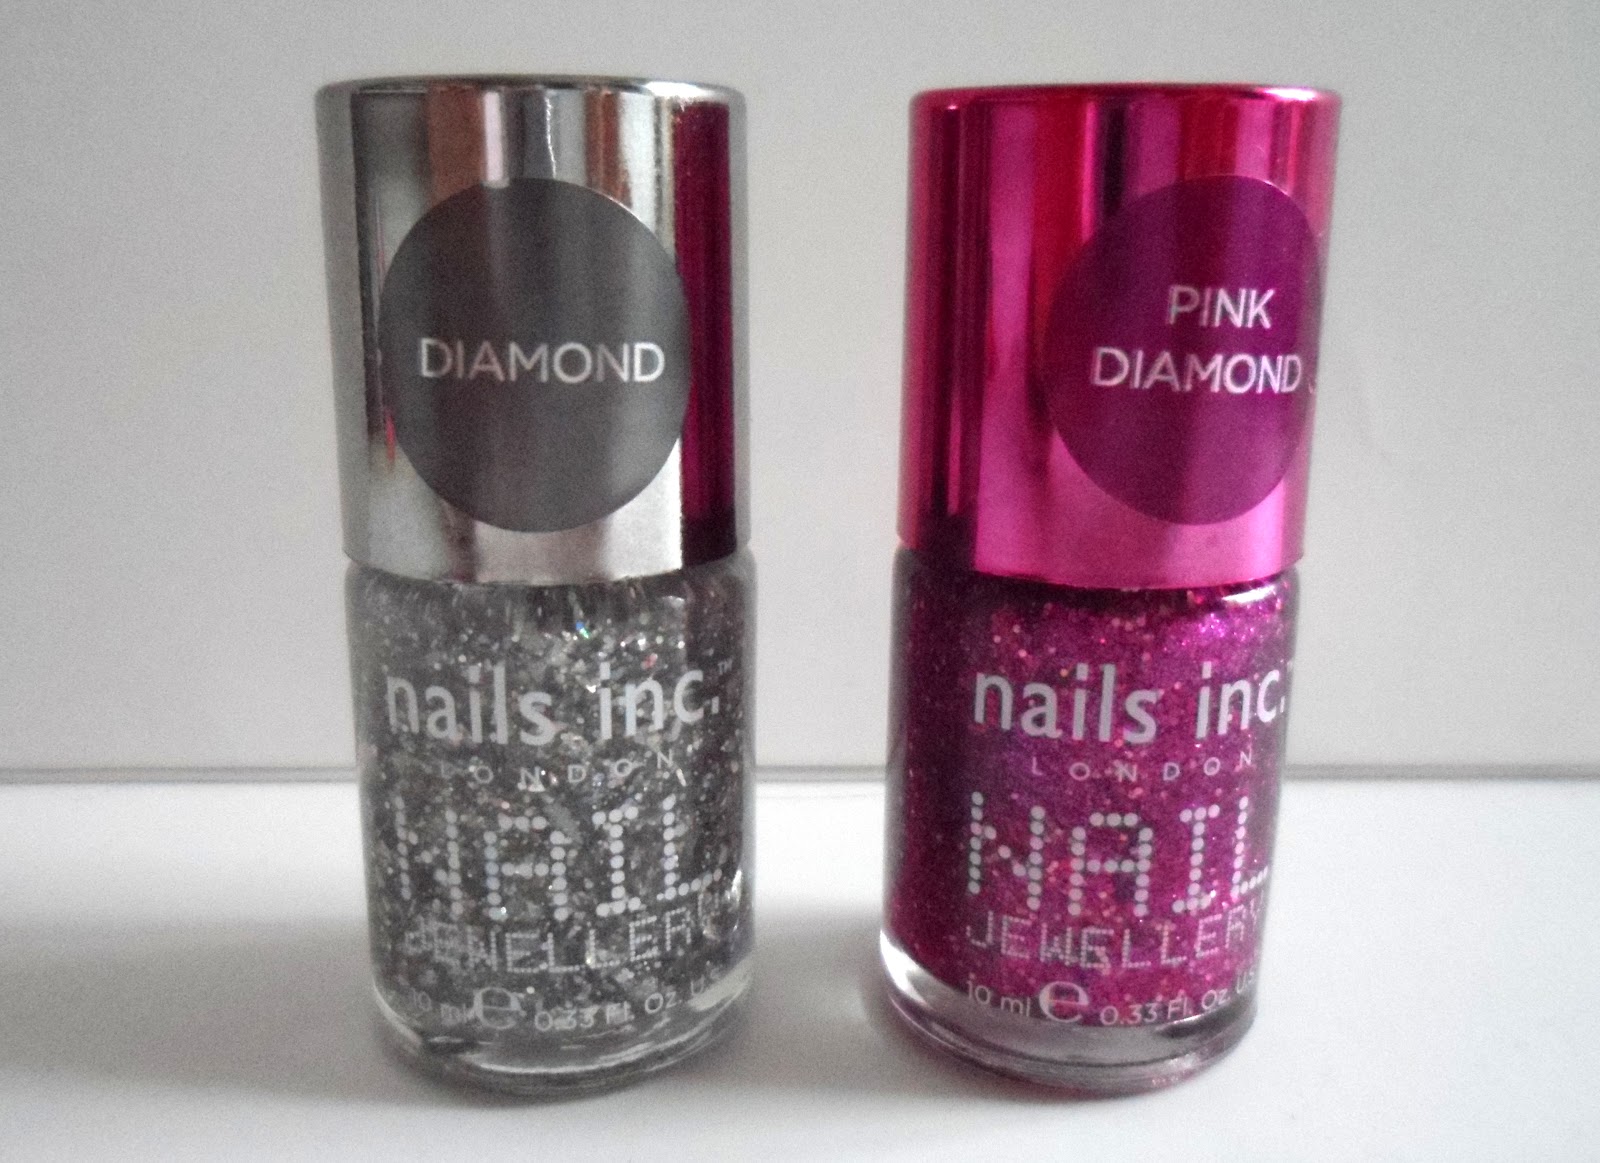 This is the diamond and pink diamond polish from the new Nail Jewellery